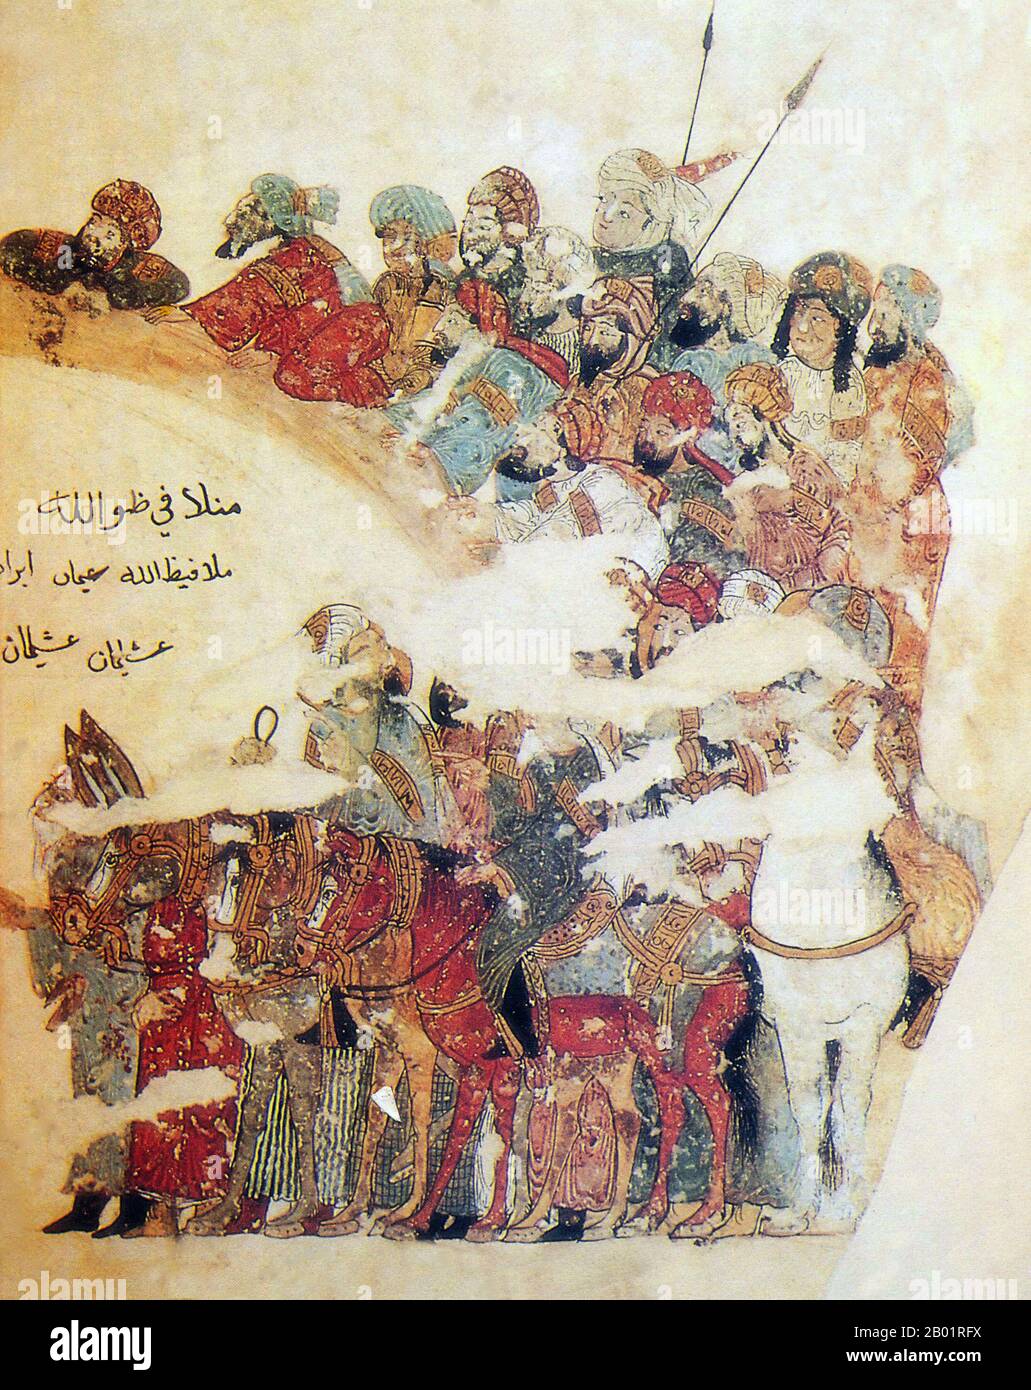 Iraq: A miniature painting by Yahya ibn Mahmud al-Wasiti, 1237 CE.  Yahyâ ibn Mahmûd al-Wâsitî was a 13th-century Arab Islamic artist. Al-Wasiti was born in Wasit in southern Iraq. He was noted for his illustrations of the Maqam of al-Hariri.  Maqāma (literally 'assemblies') are an (originally) Arabic literary genre of rhymed prose with intervals of poetry in which rhetorical extravagance is conspicuous. The 10th century author Badī' al-Zaman al-Hamadhāni is said to have invented the form, which was extended by al-Hariri of Basra in the next century. Stock Photo